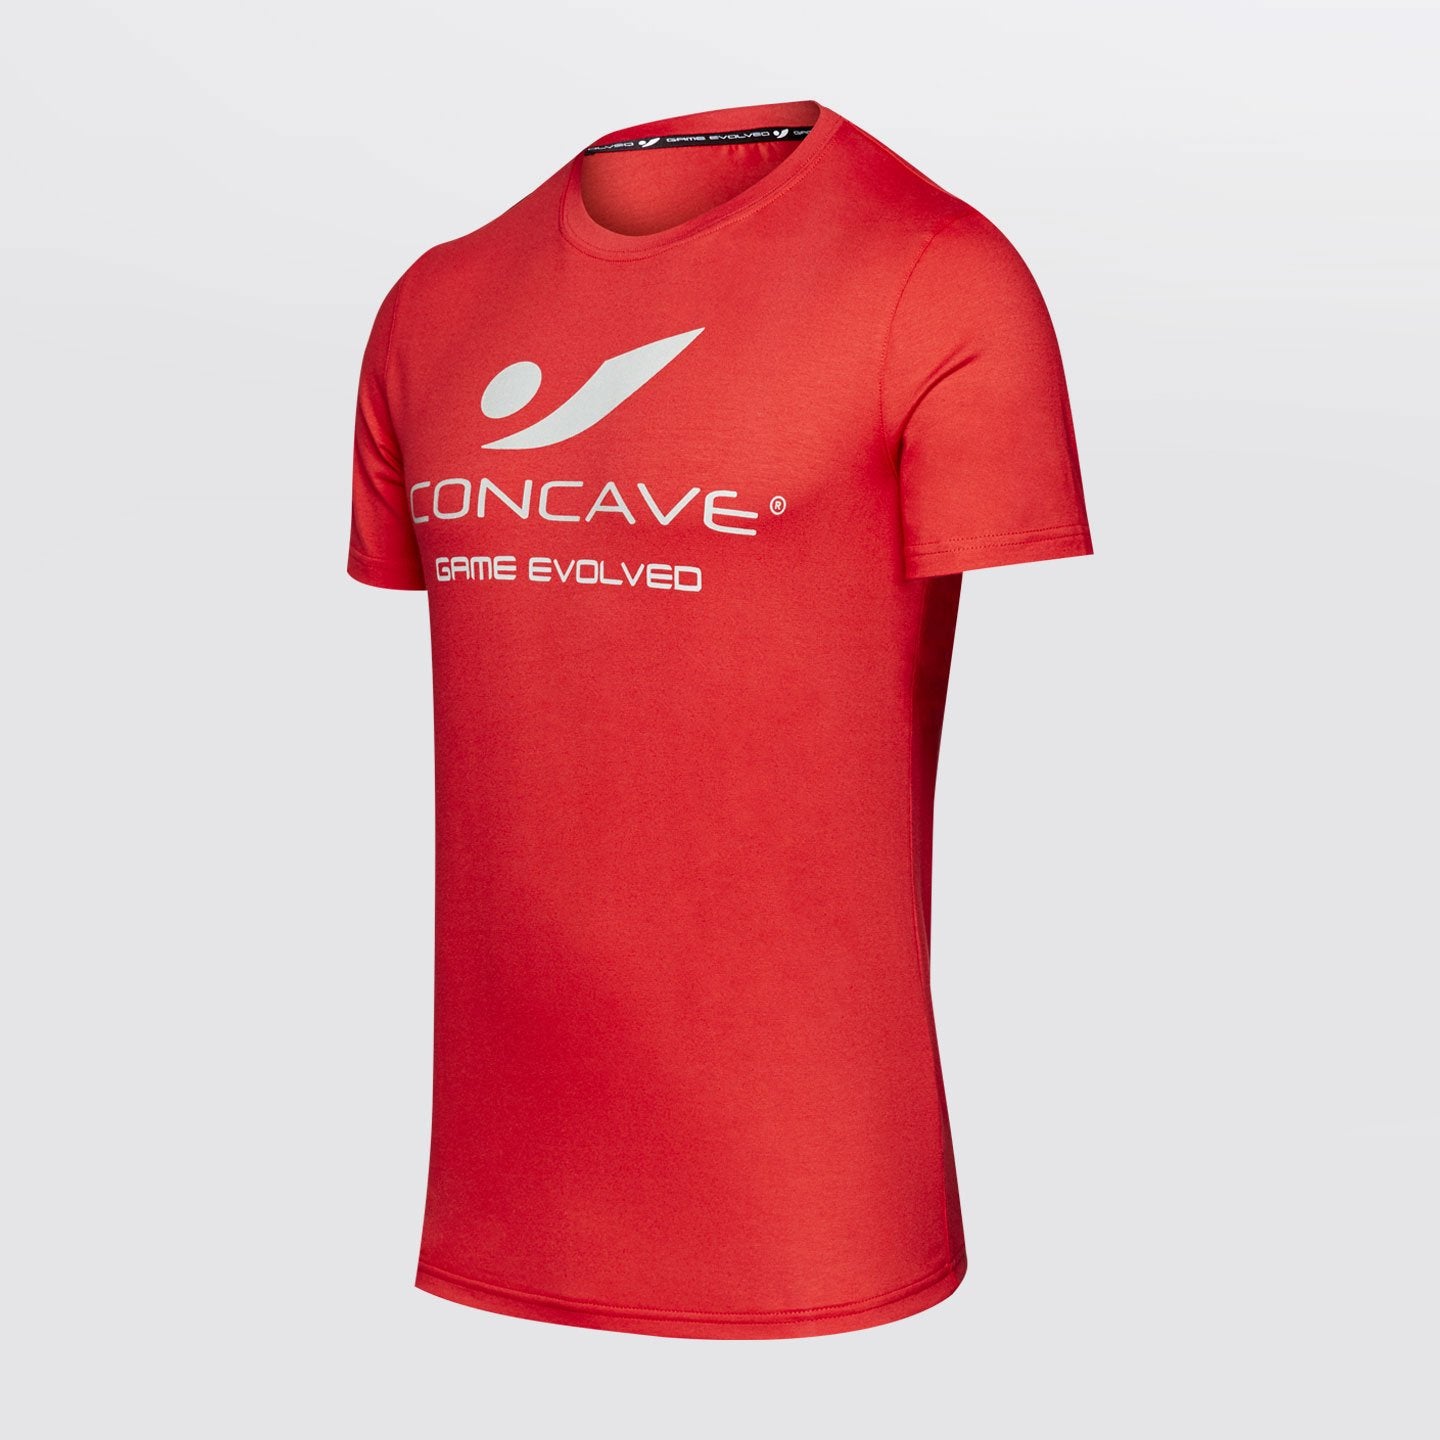 Concave T-Shirt - Red/Silver